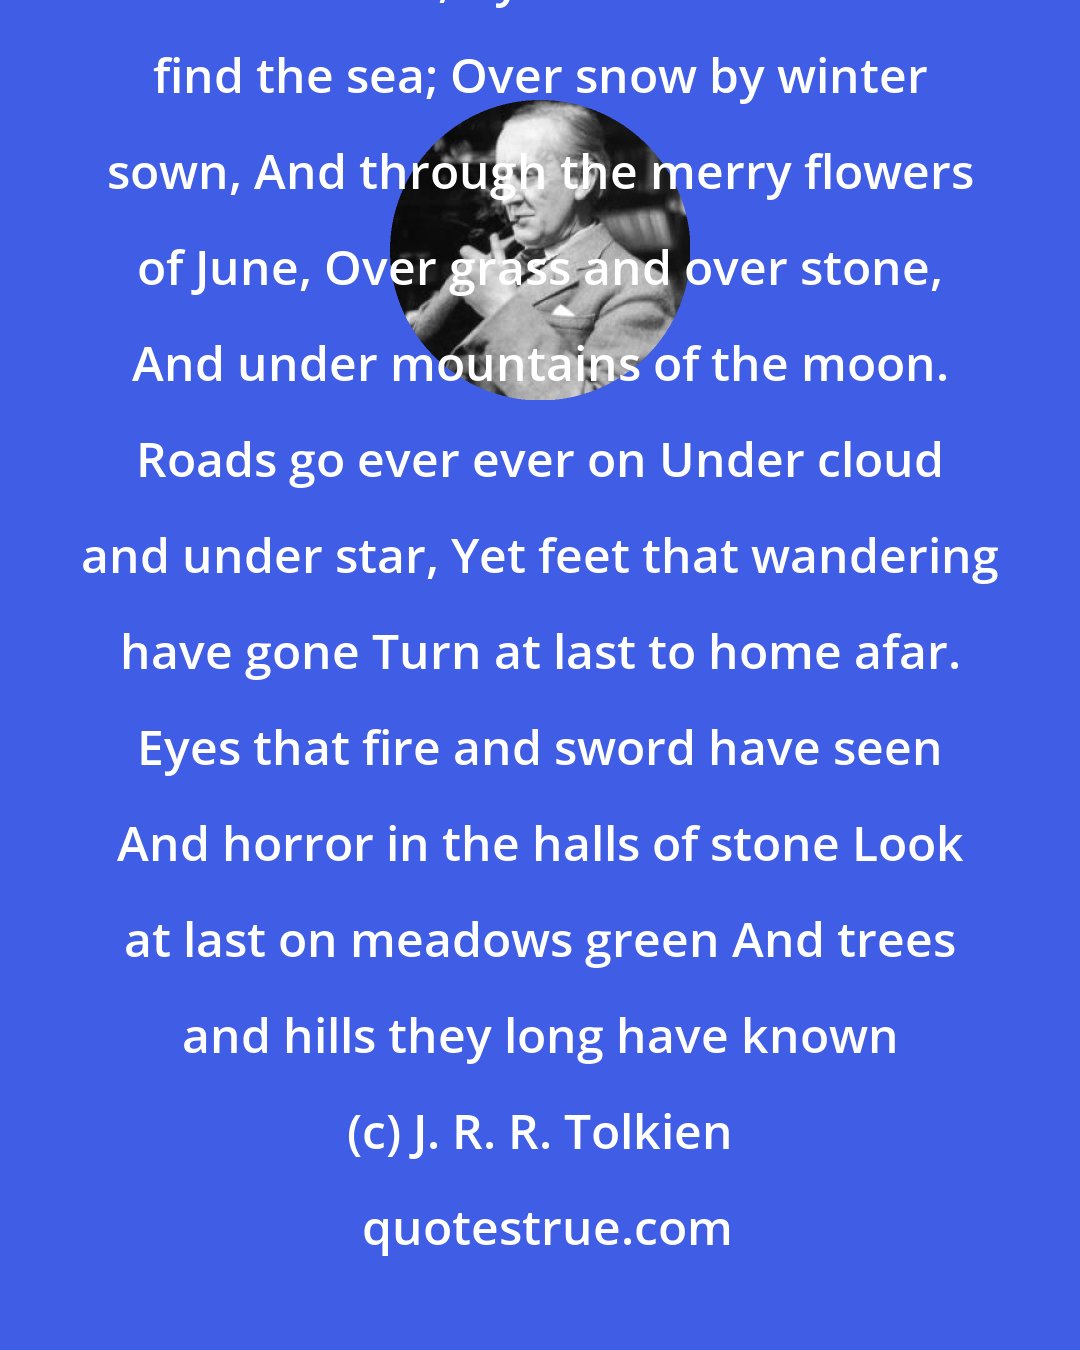 J. R. R. Tolkien: Roads go ever ever on, Over rock and under tree, By caves where never sun has shone, By streams that never find the sea; Over snow by winter sown, And through the merry flowers of June, Over grass and over stone, And under mountains of the moon. Roads go ever ever on Under cloud and under star, Yet feet that wandering have gone Turn at last to home afar. Eyes that fire and sword have seen And horror in the halls of stone Look at last on meadows green And trees and hills they long have known